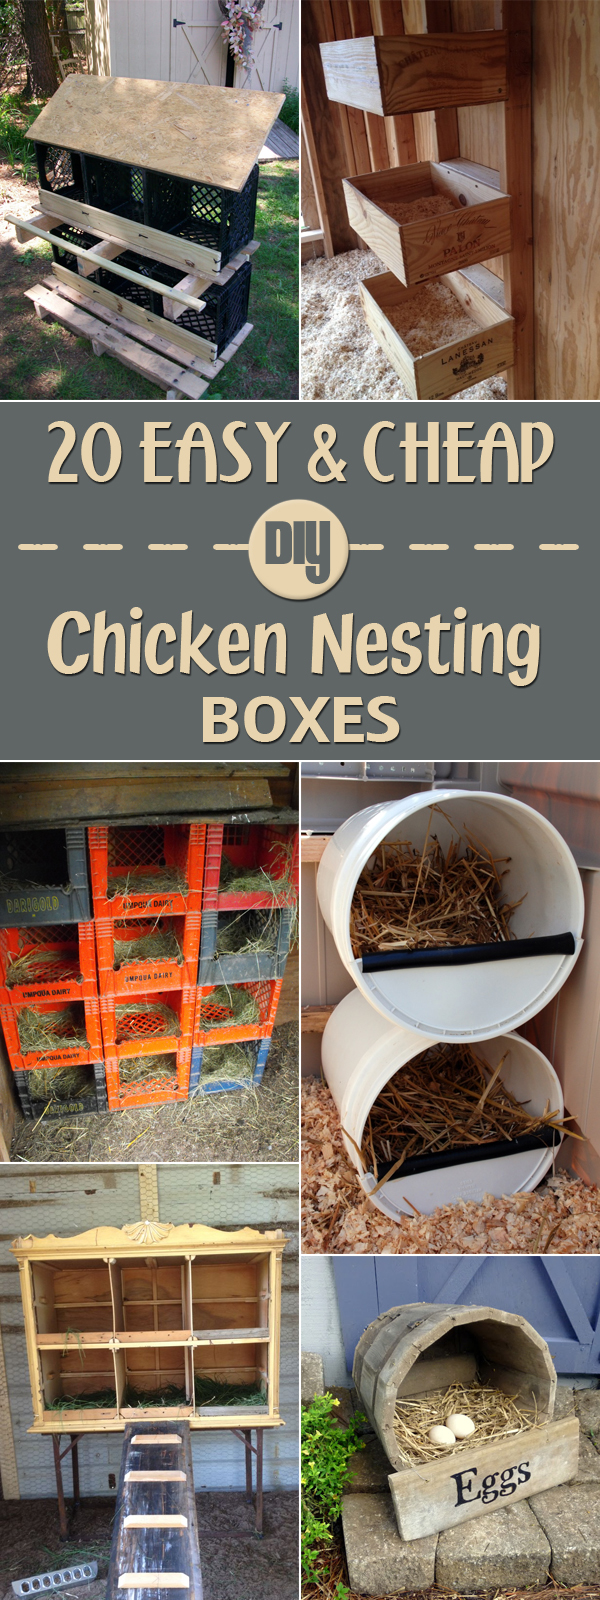 20 Easy and Cheap DIY Chicken Nesting Boxes